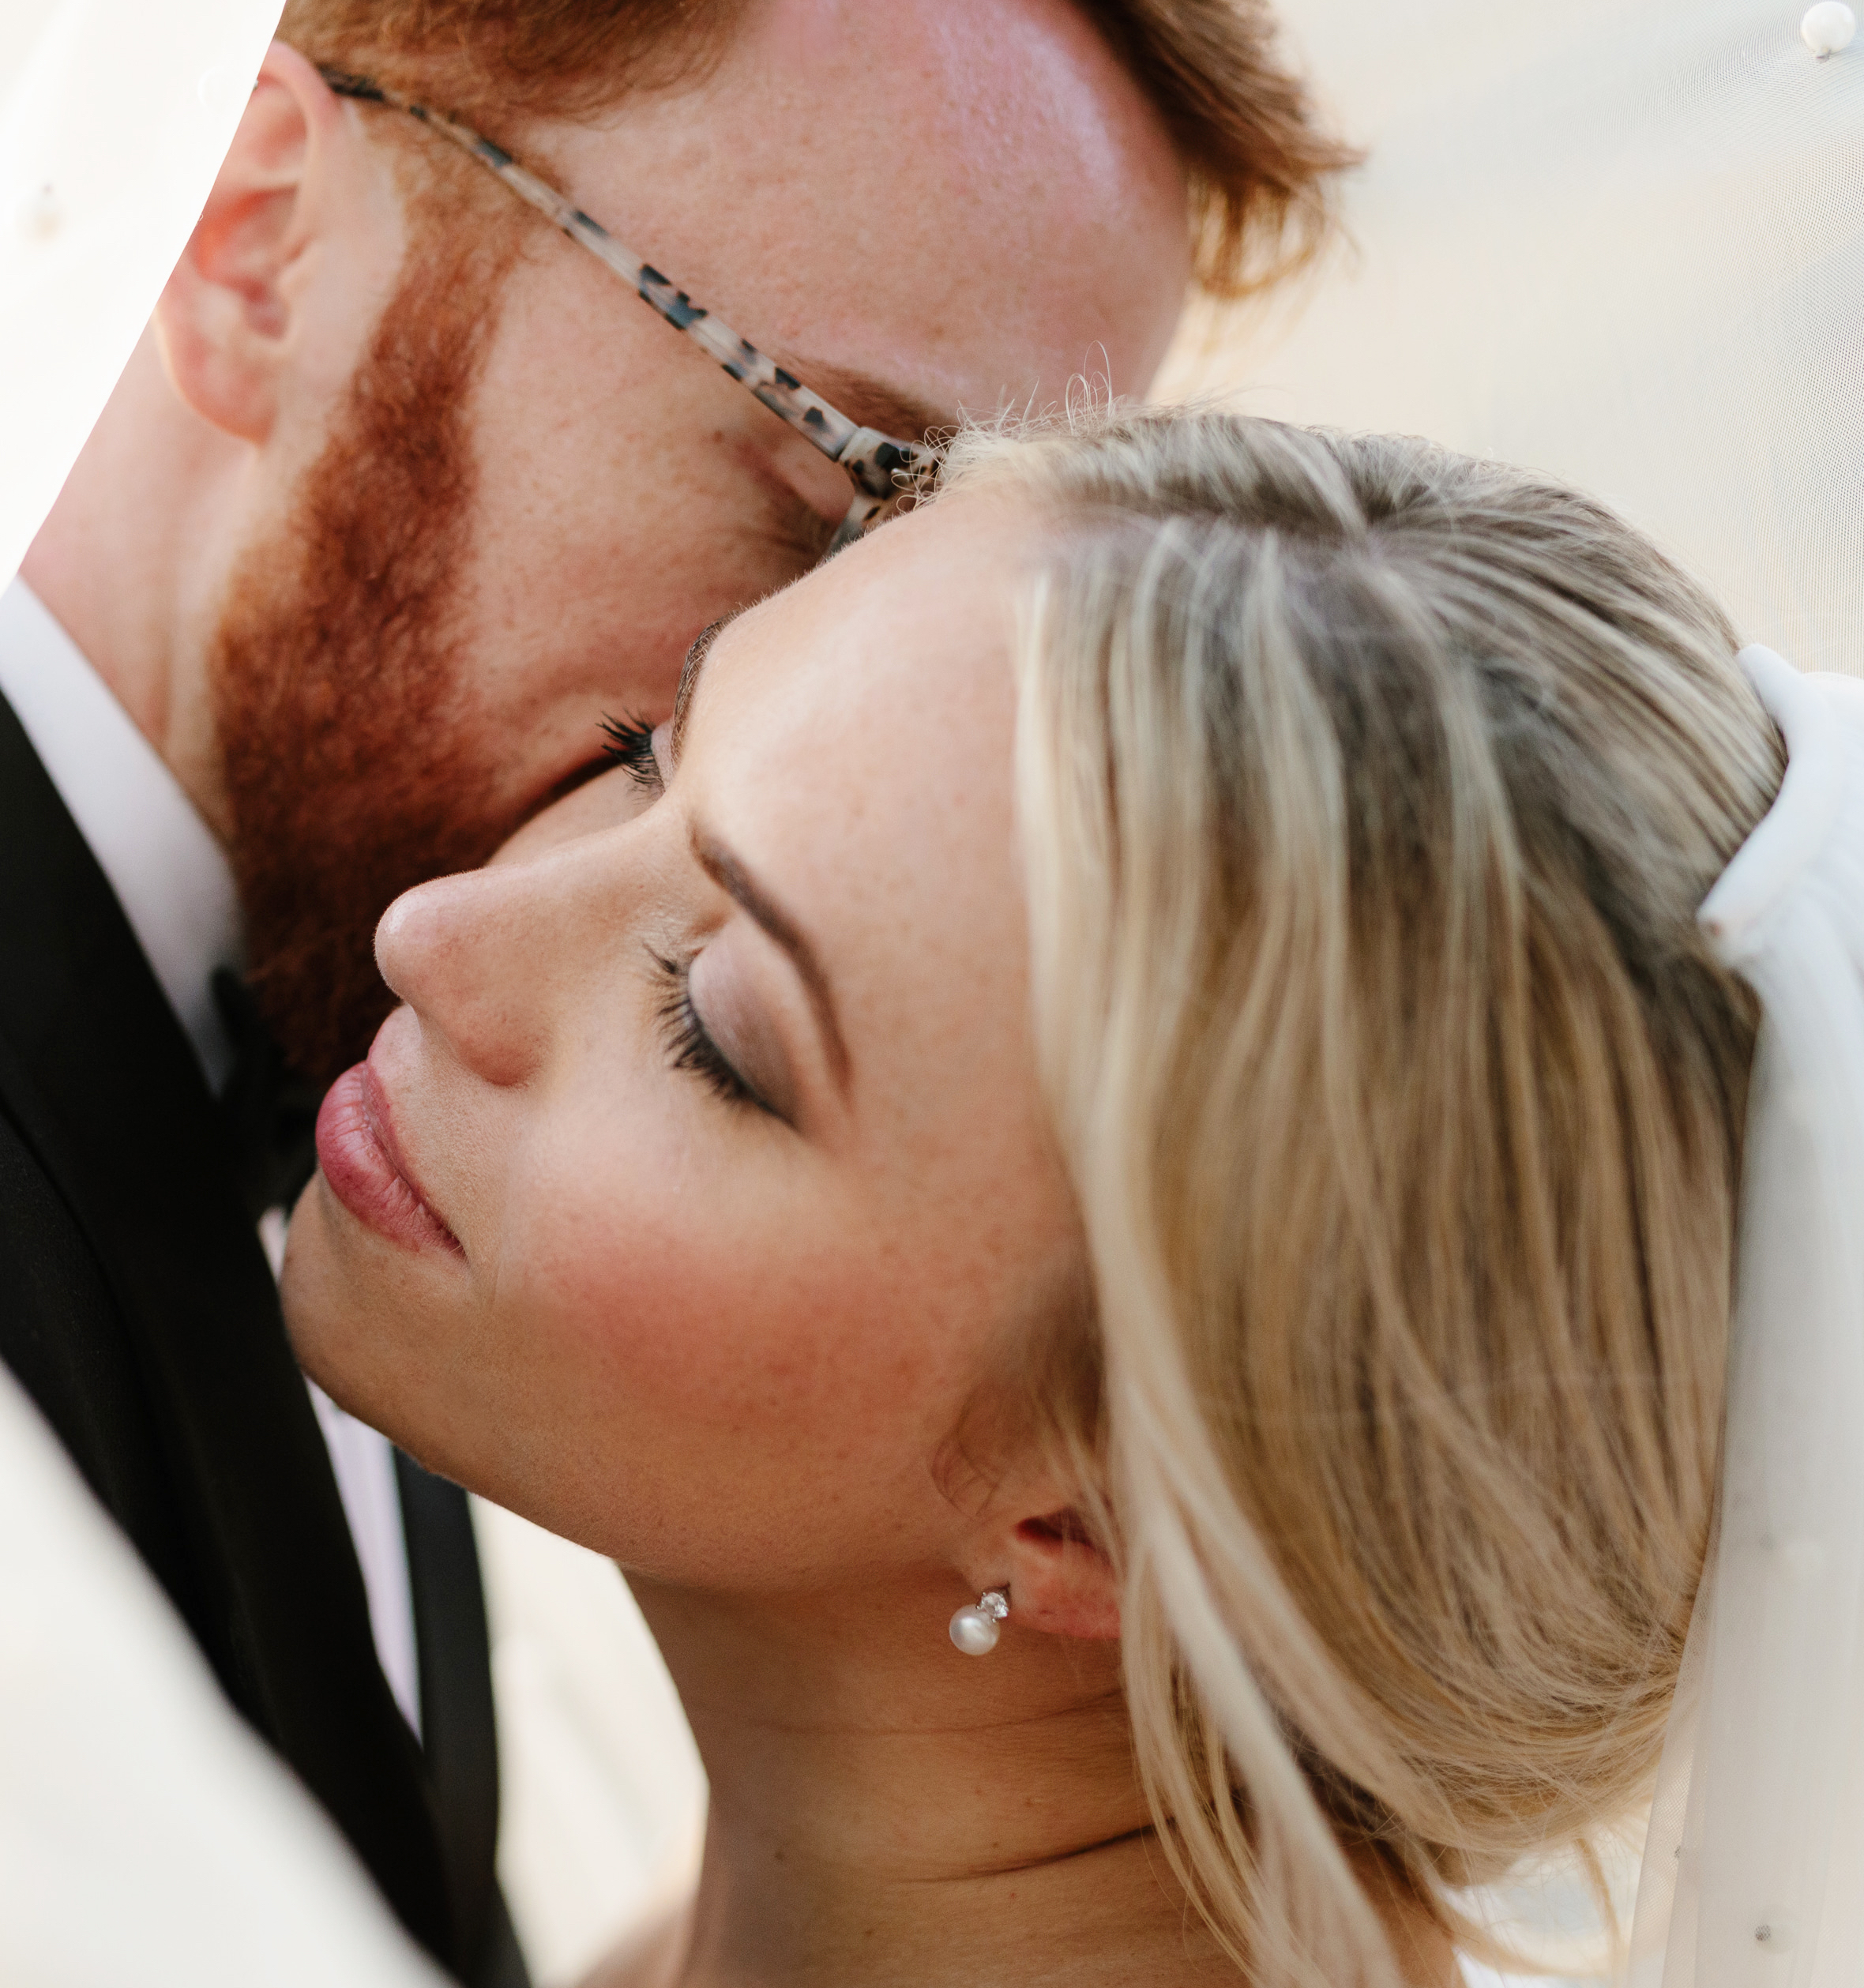 A close up photo of a groom kissing his bride's cheek as her veil wraps around them in the wind.